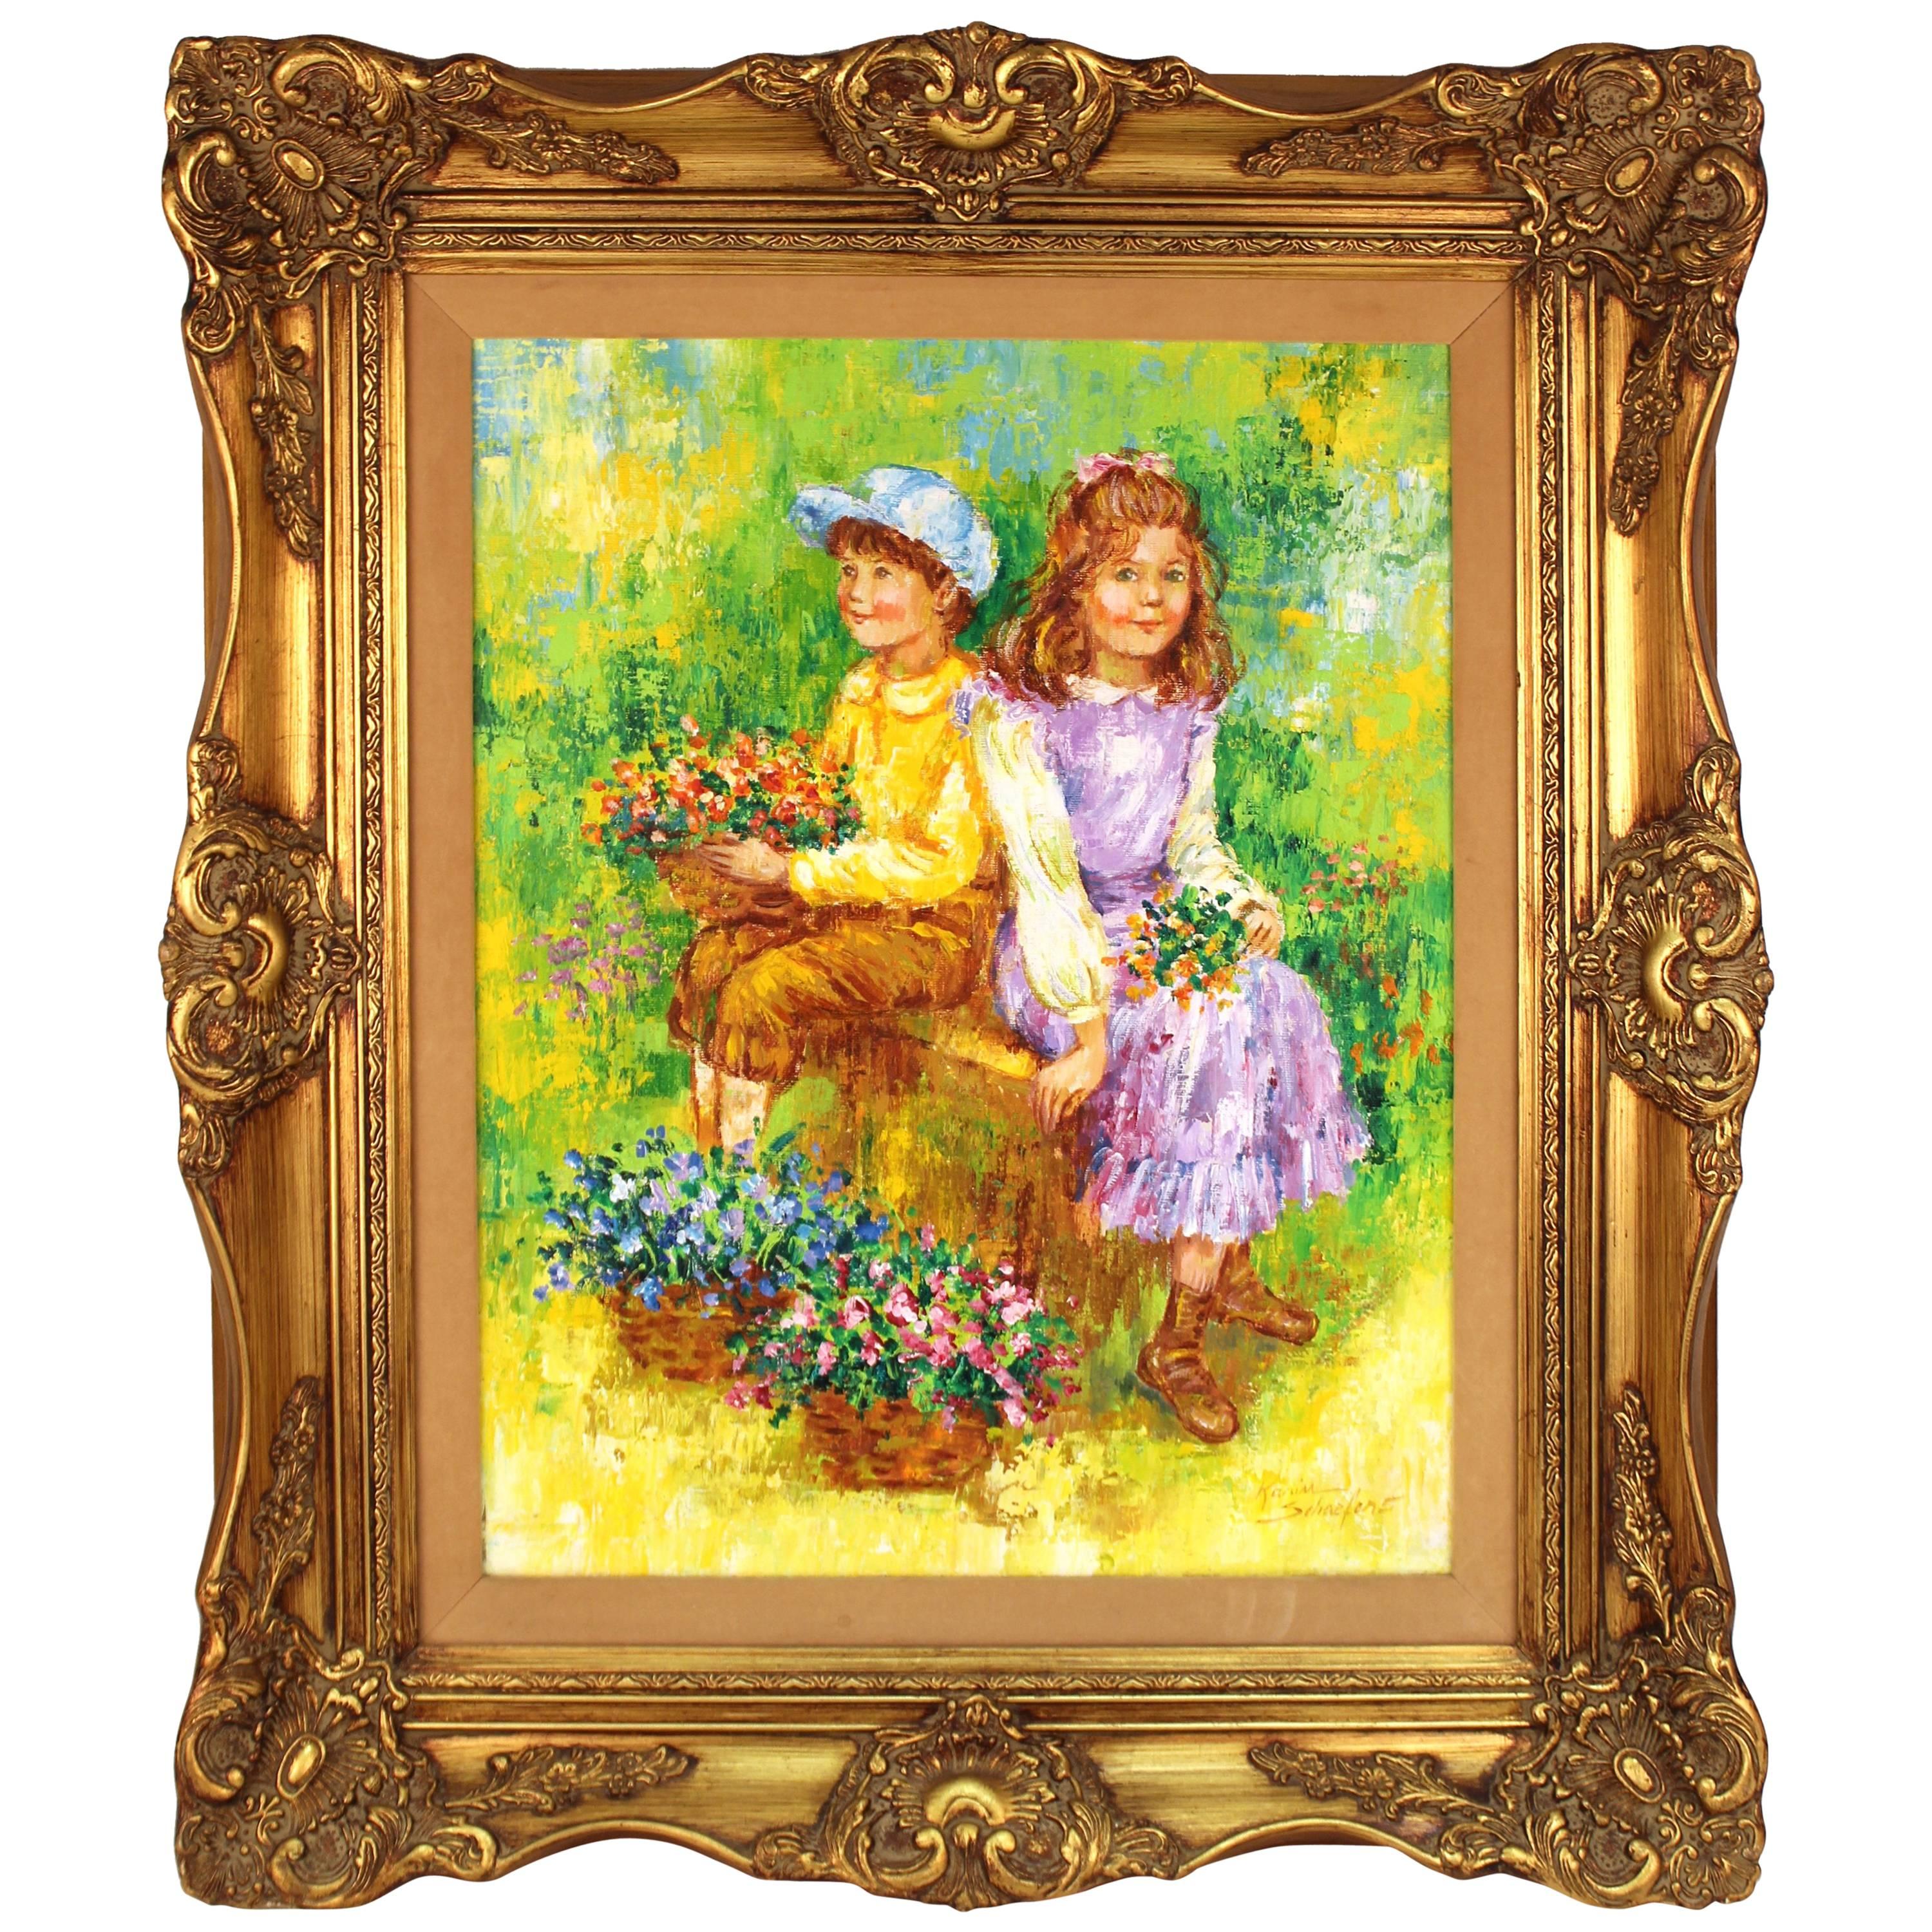  Painting Titled 'Children Holding Flowers in a Field' by Karin Schaefers 